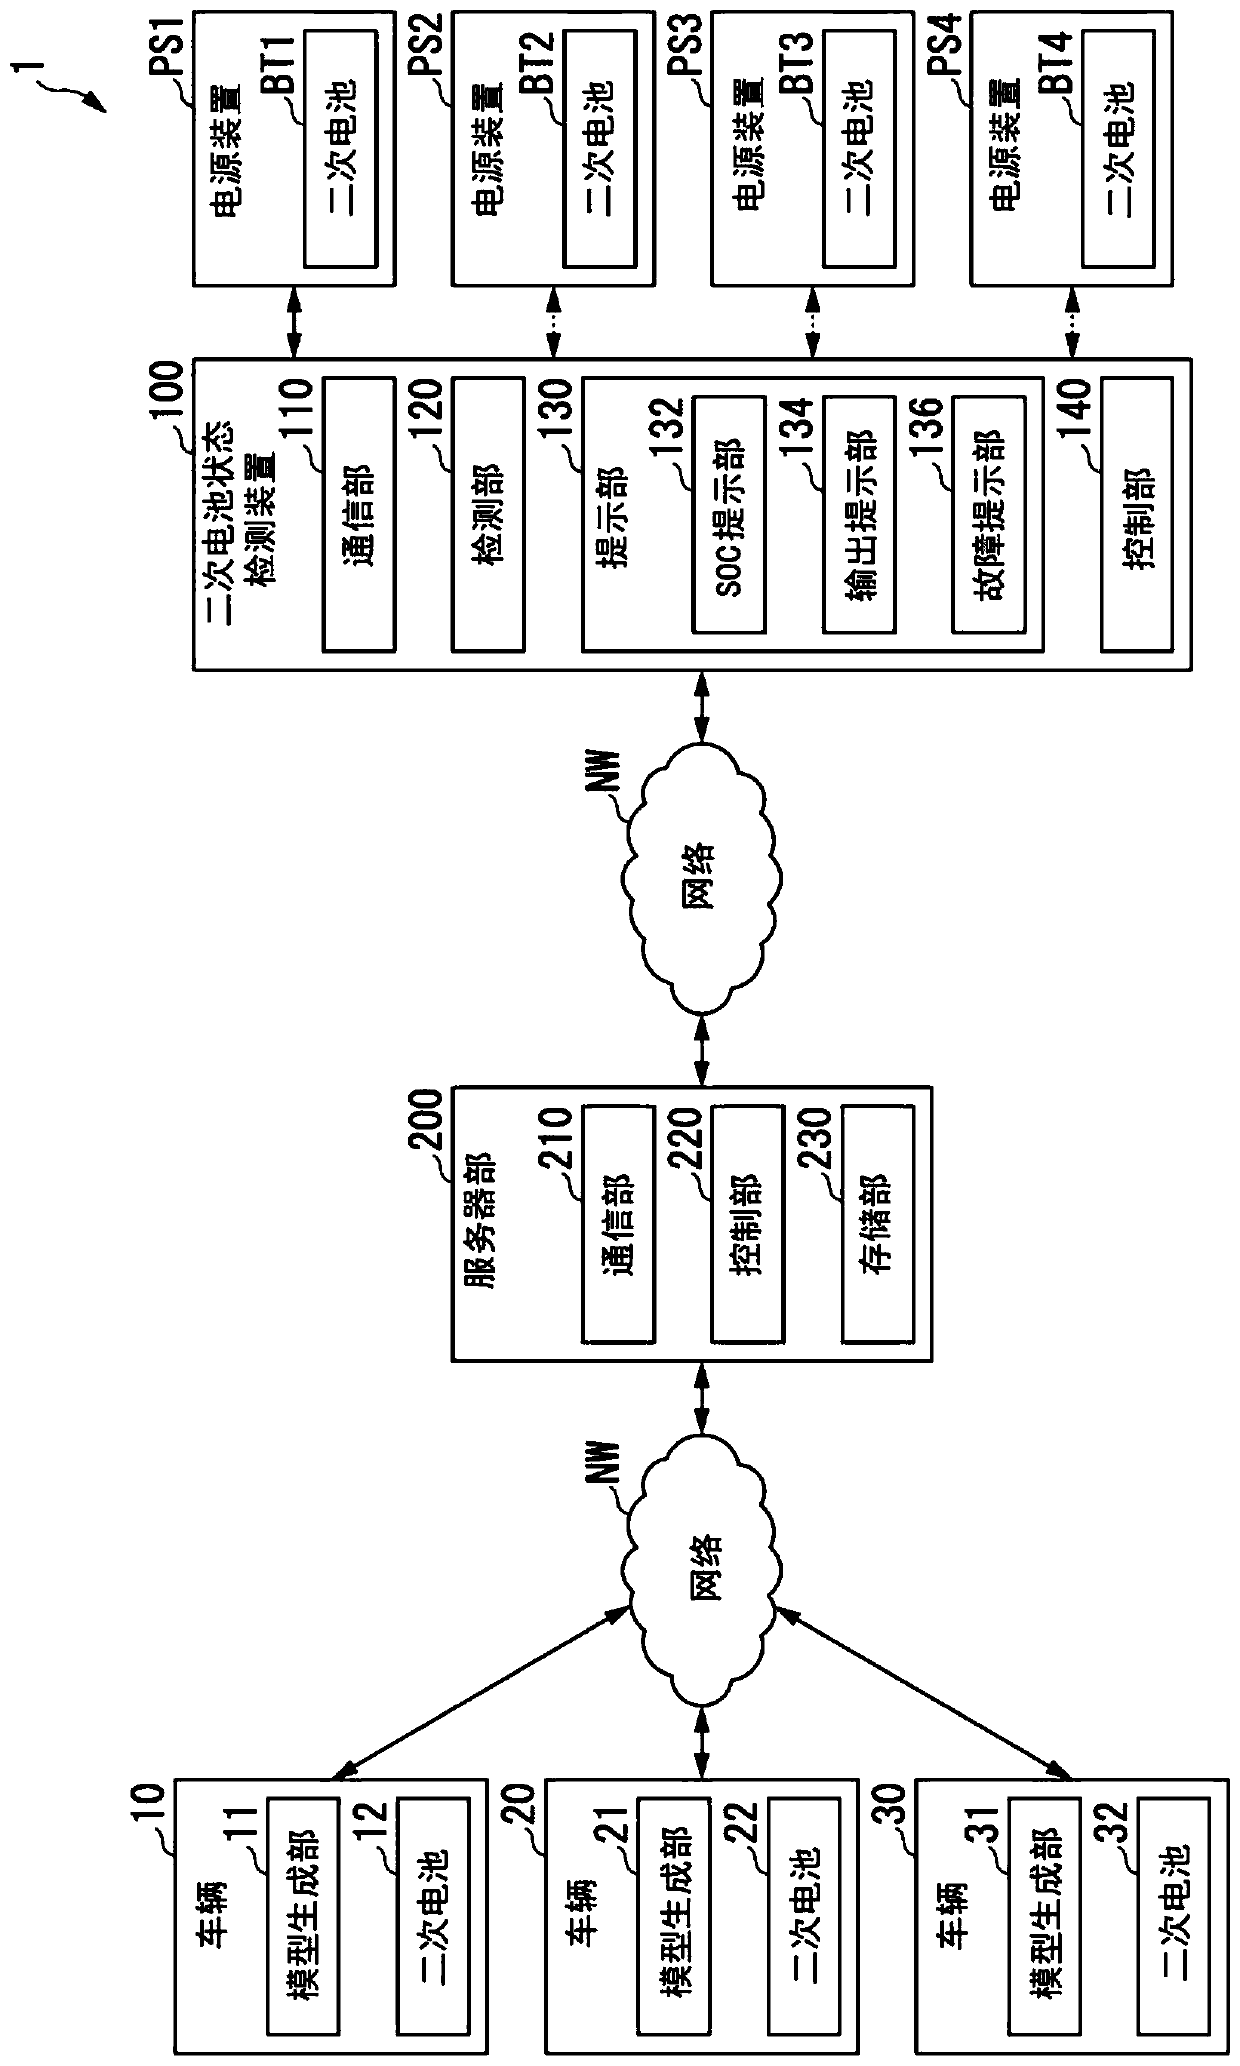 Secondary battery state detecting system, secondary battery state detecting device, and secondary battery state detecting method